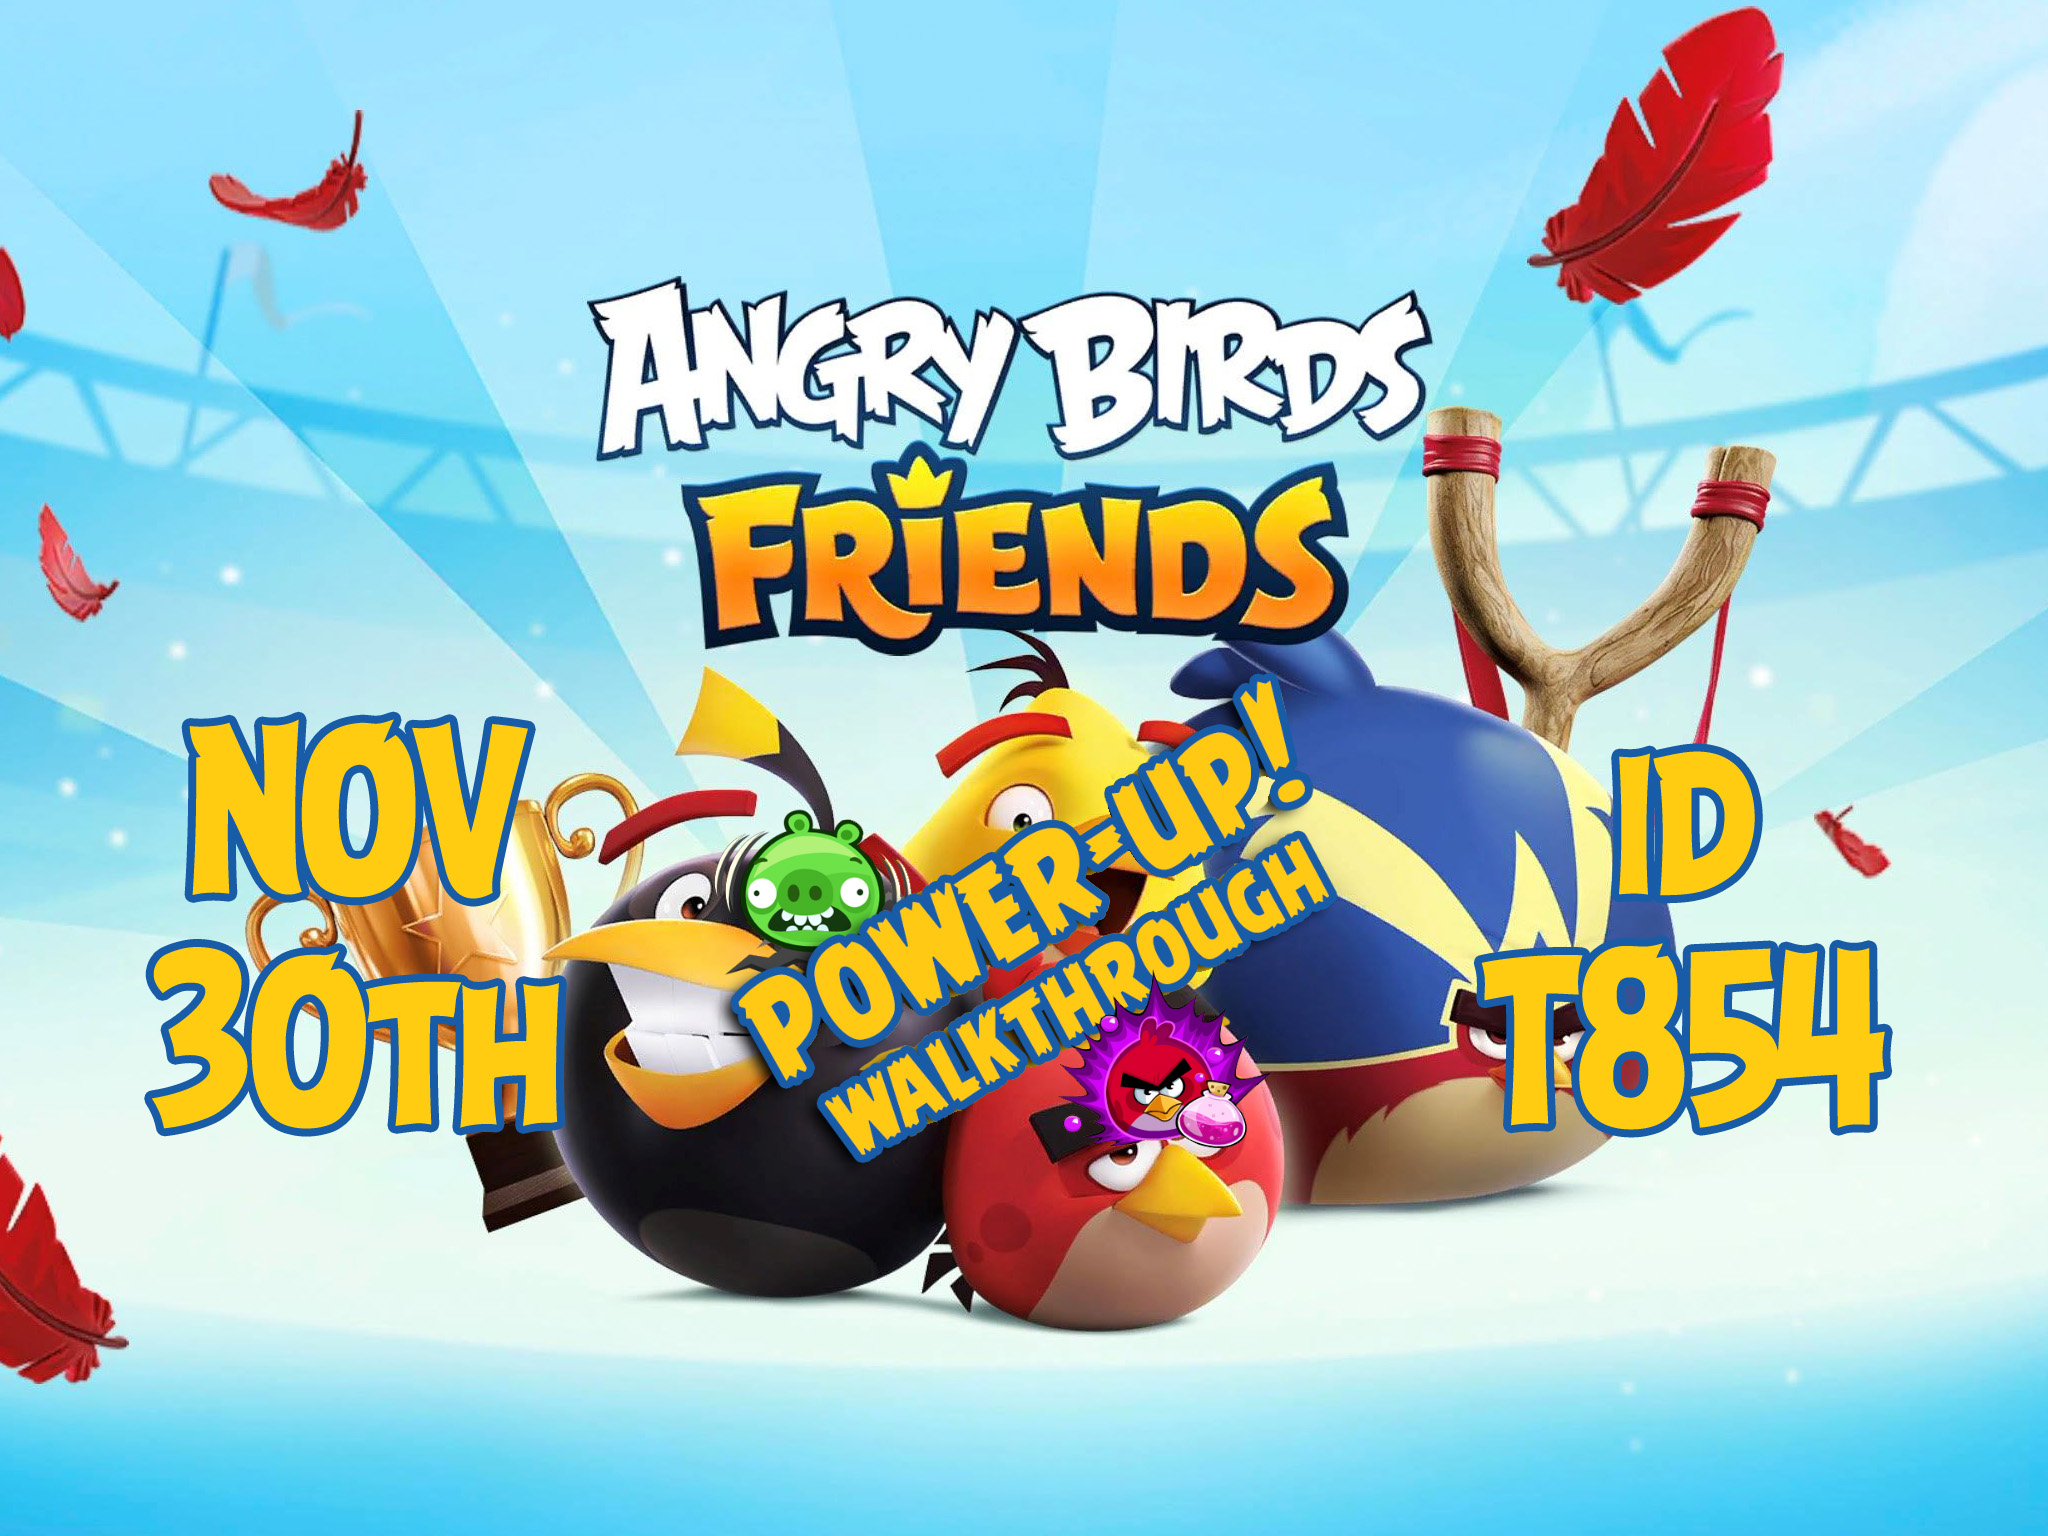 Angry-Birds-Friends-Tournament-T854-Feature-Image-PU